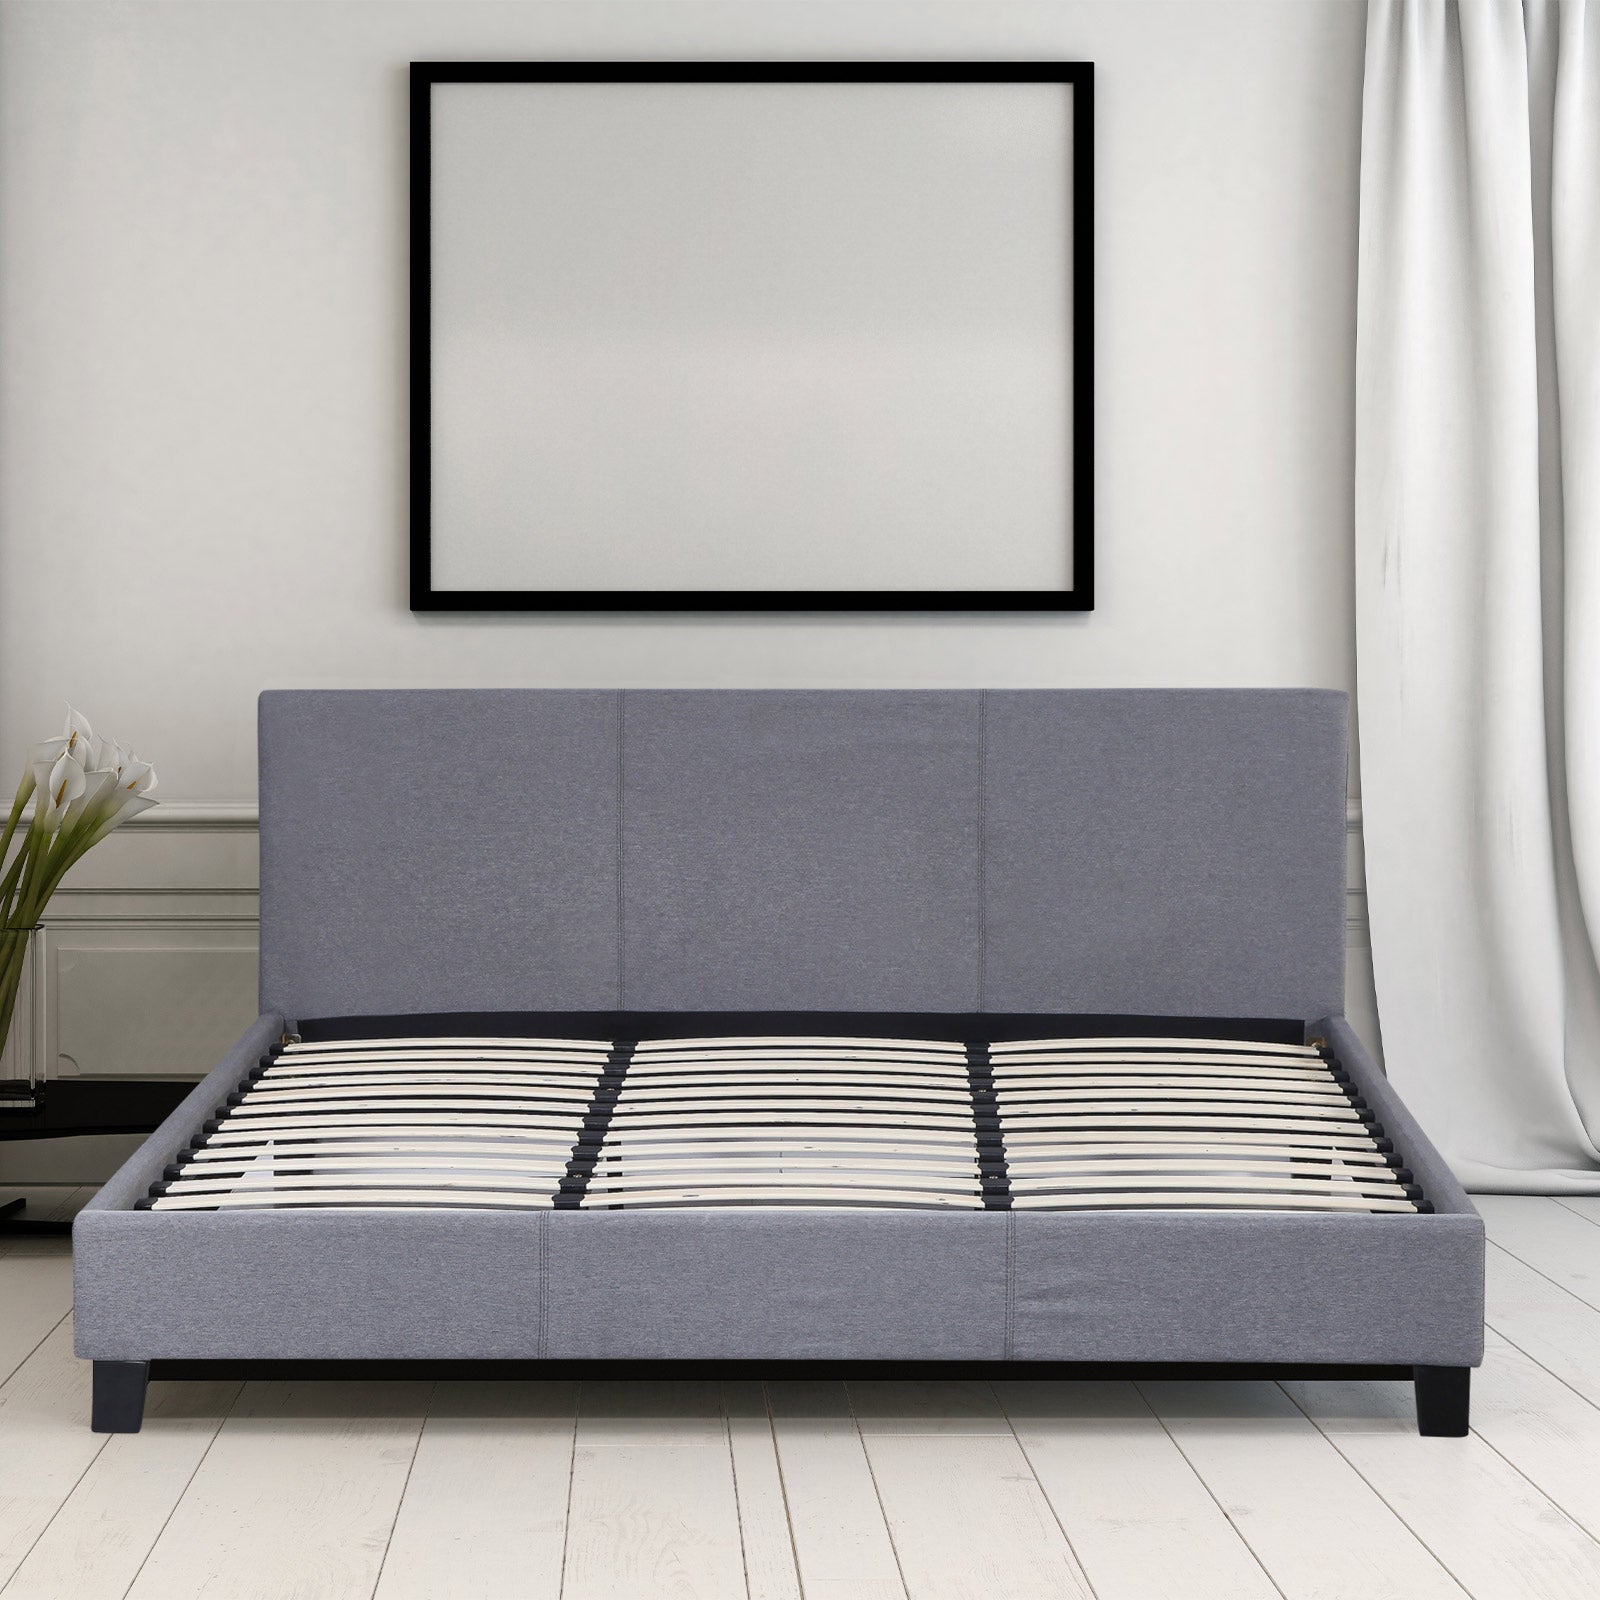 Milano Sienna Luxury Bed Frame Base And Headboard Solid Wood Padded Linen Fabric - King Single - Grey